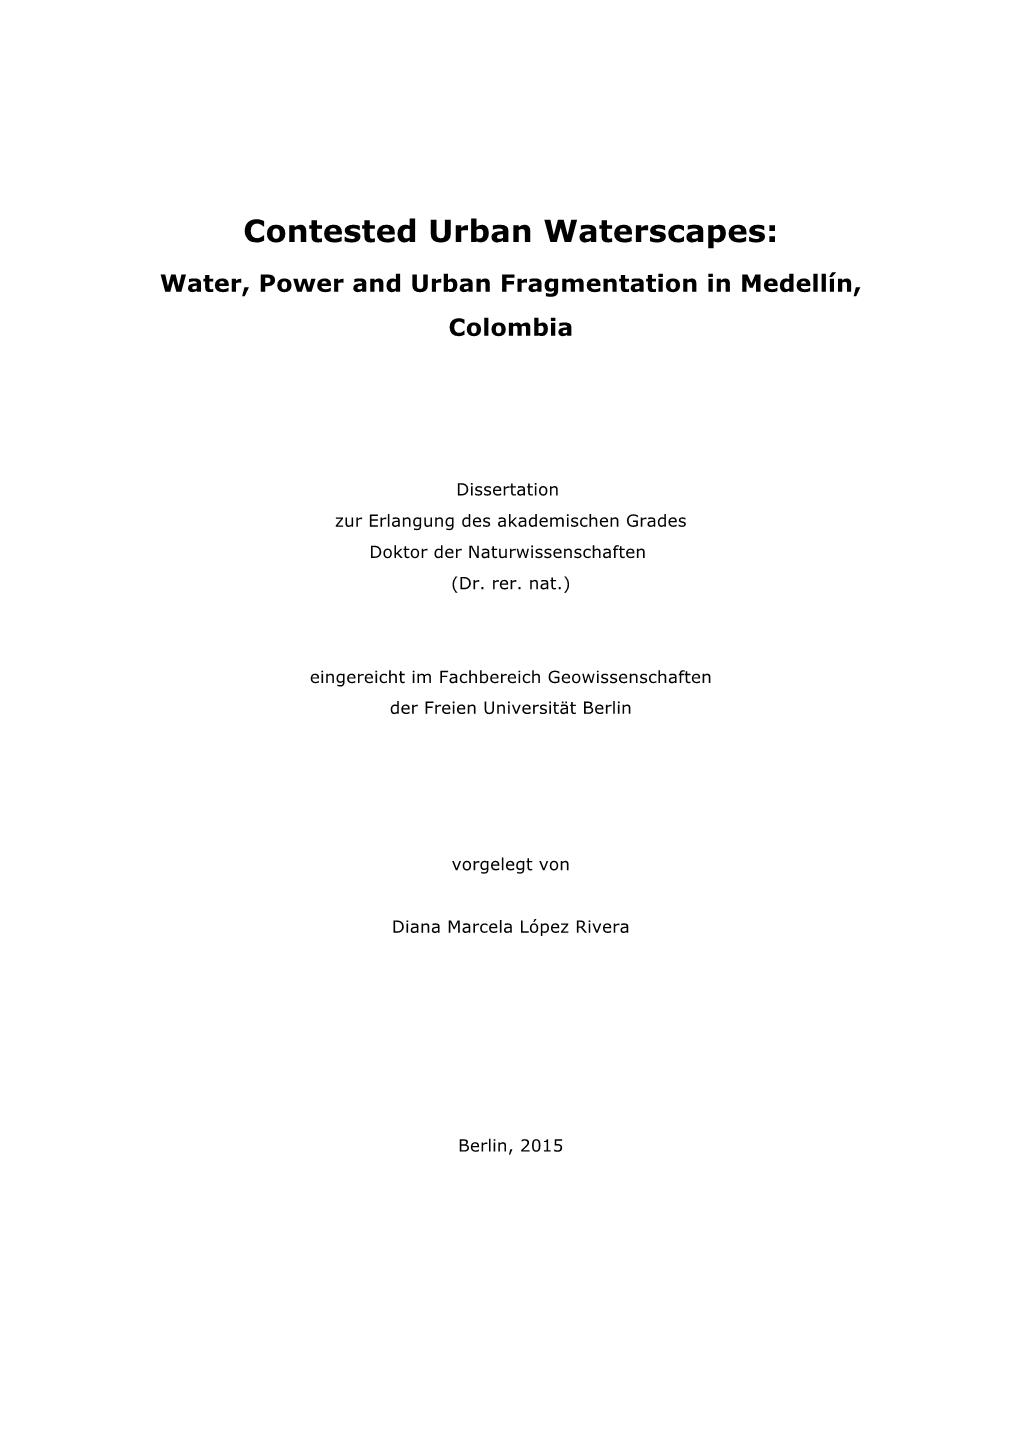 Contested Urban Waterscapes